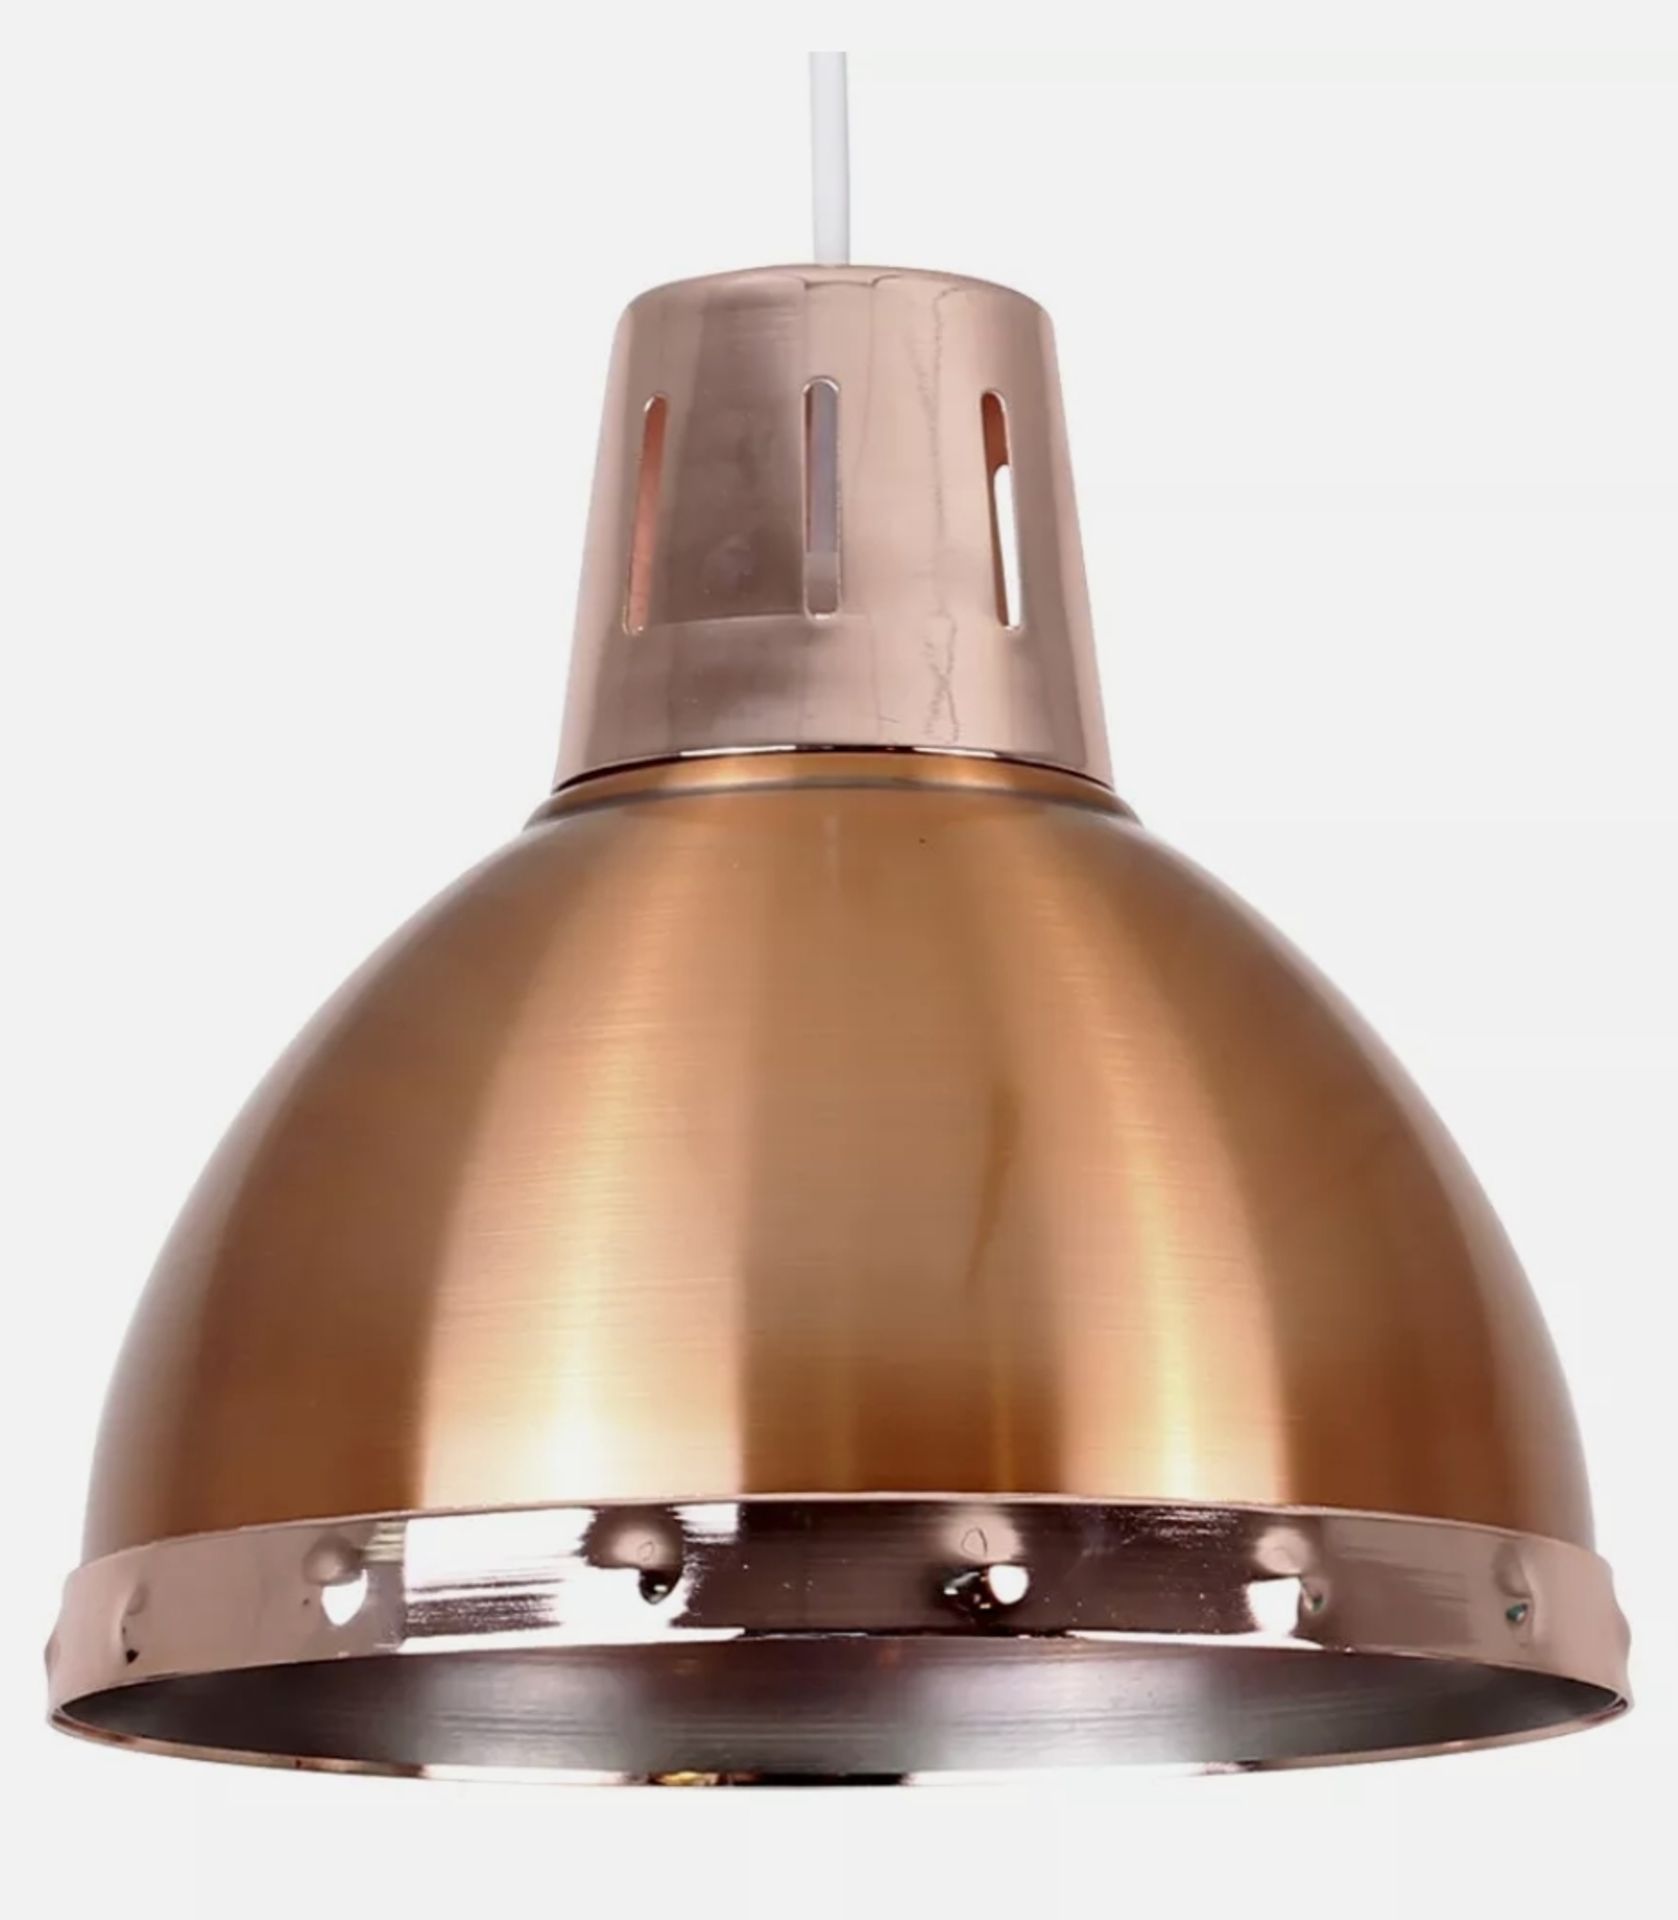 3 x NEW IN THE BOX VINATGE STYLE PENDANT LIGHTS IN COPPER SEE DESCRIPTION FOR SIZE NO RESERVE